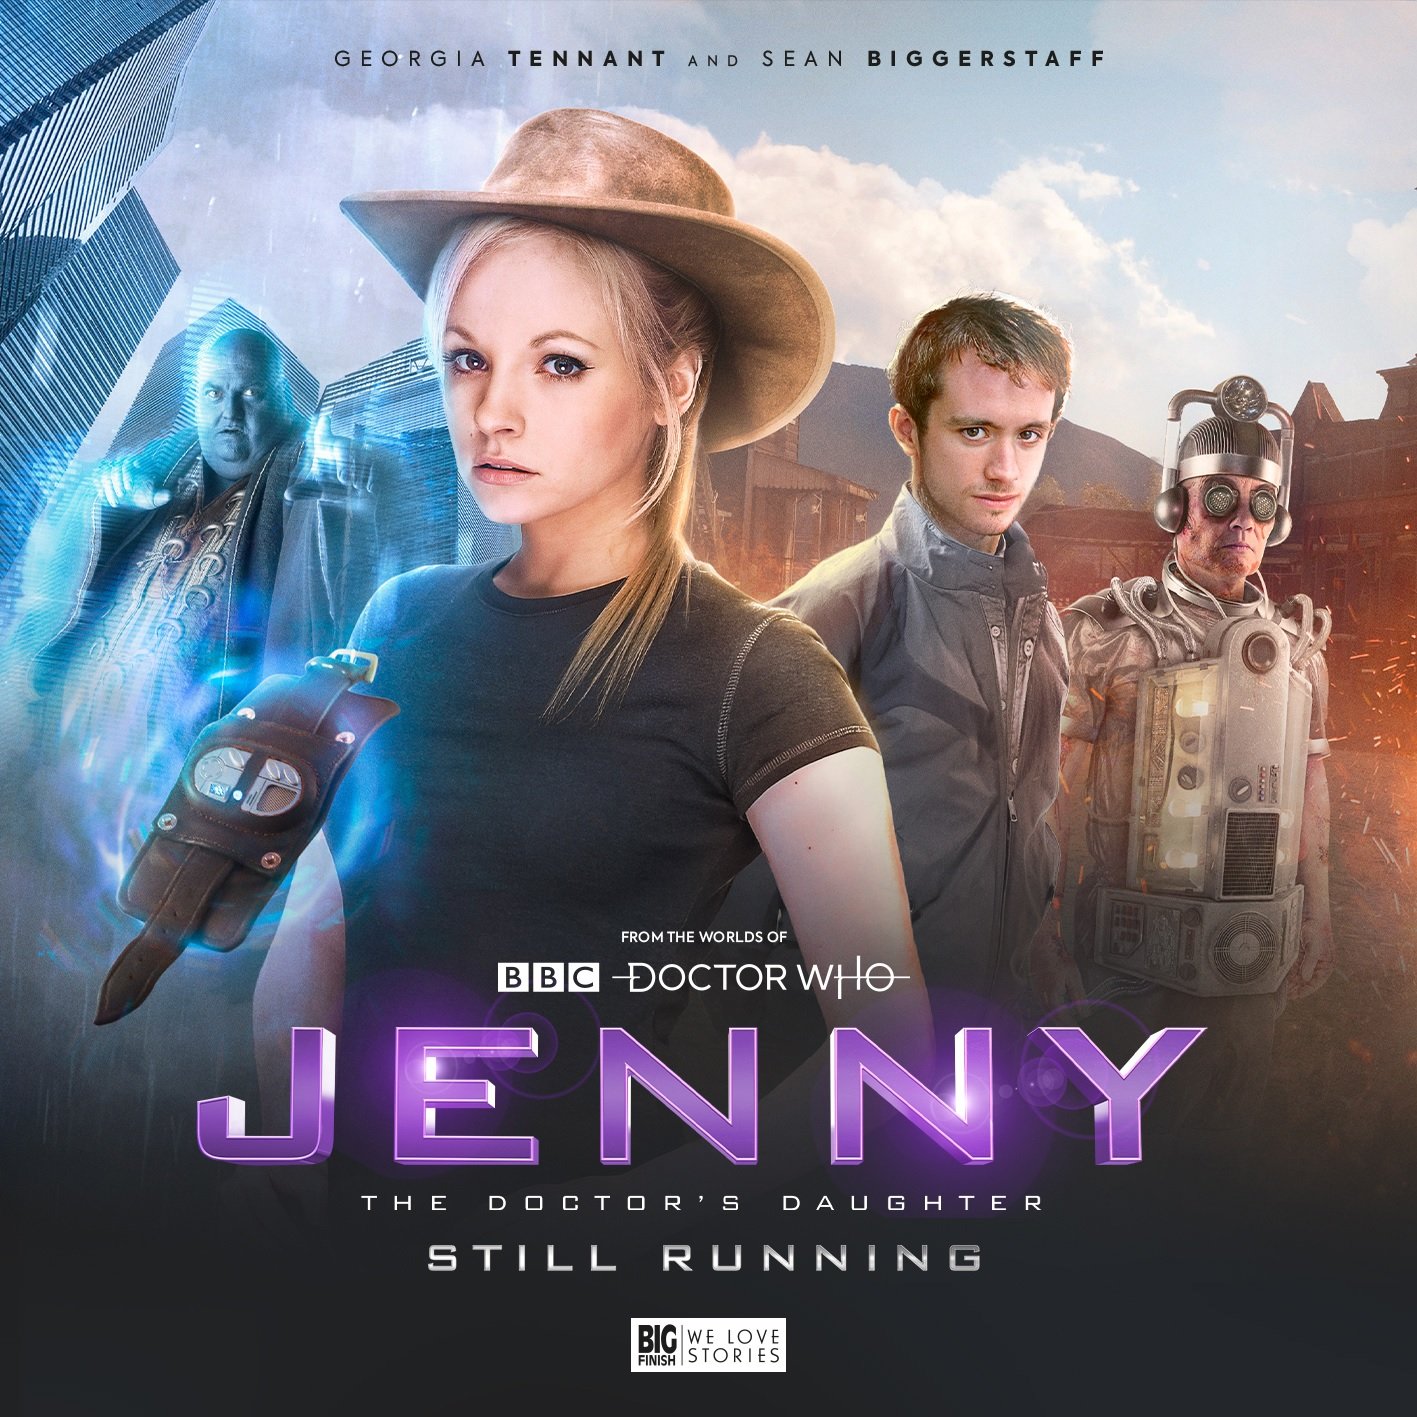 The Doctor’s Daughter, Jenny, to Meet the Cybermen in New Big Finish Boxset